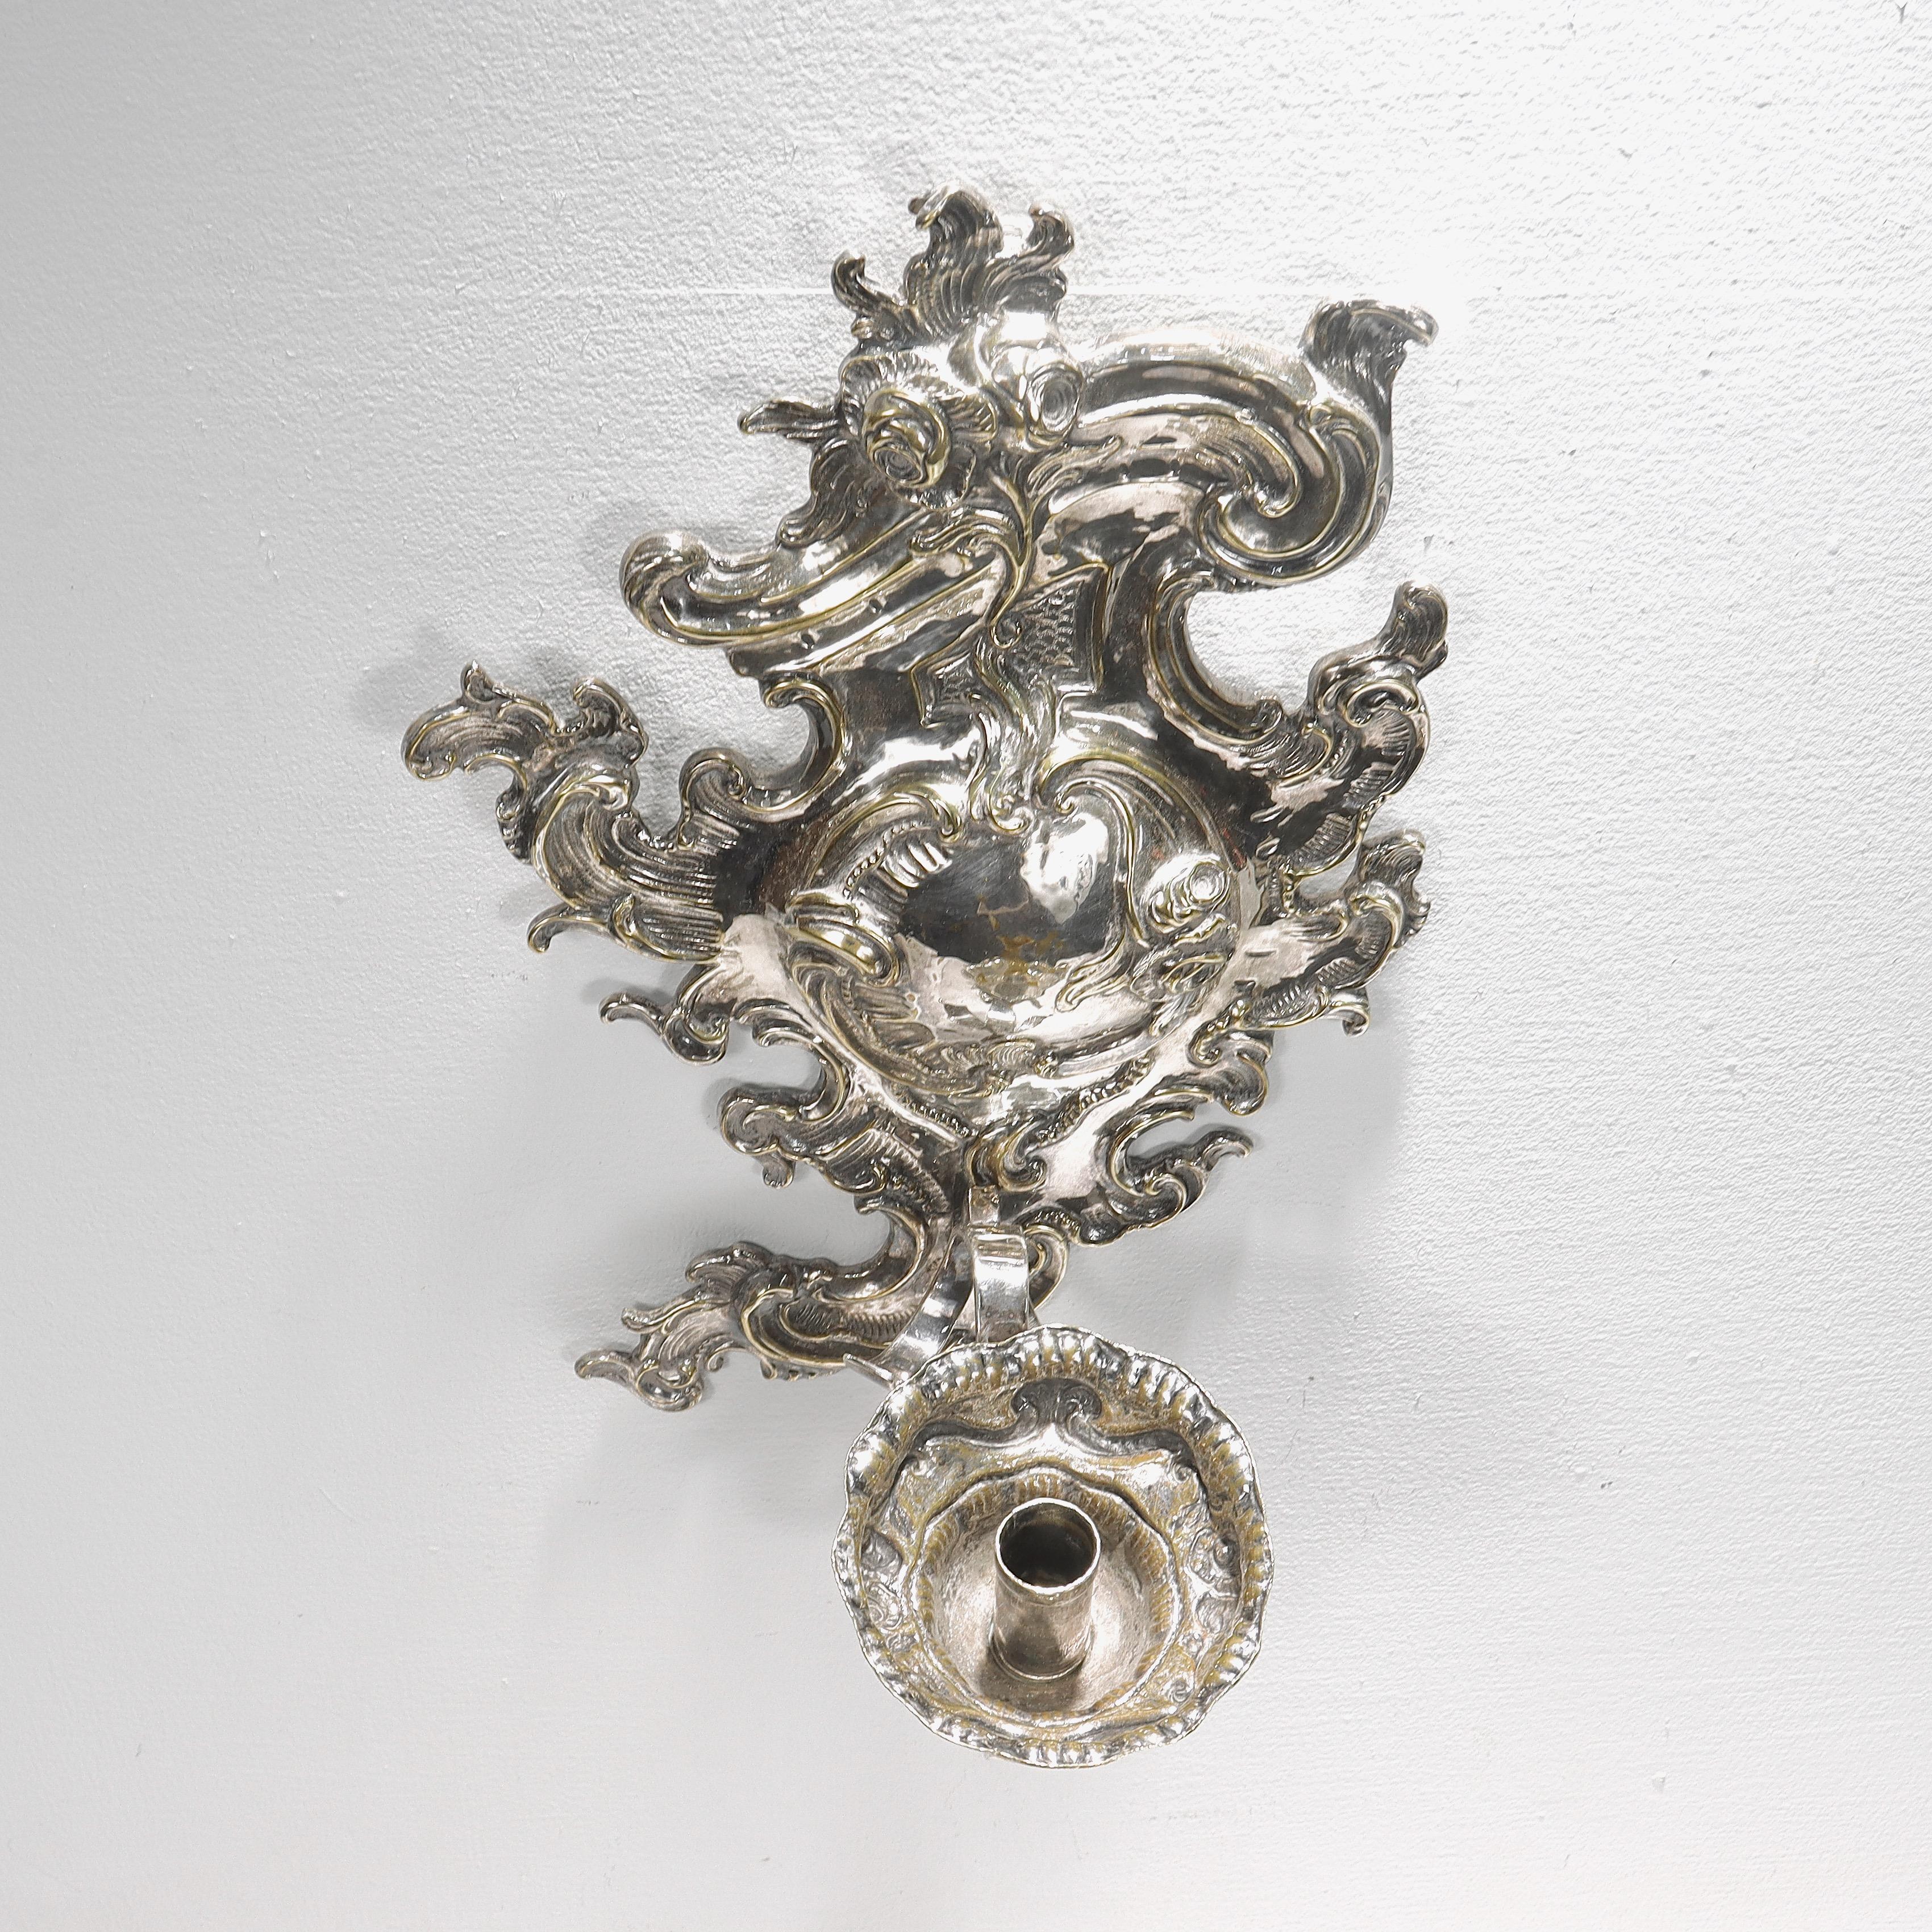 Antique Rococo or Rococo Revival Silver Plated Wall Sconces For Sale 3